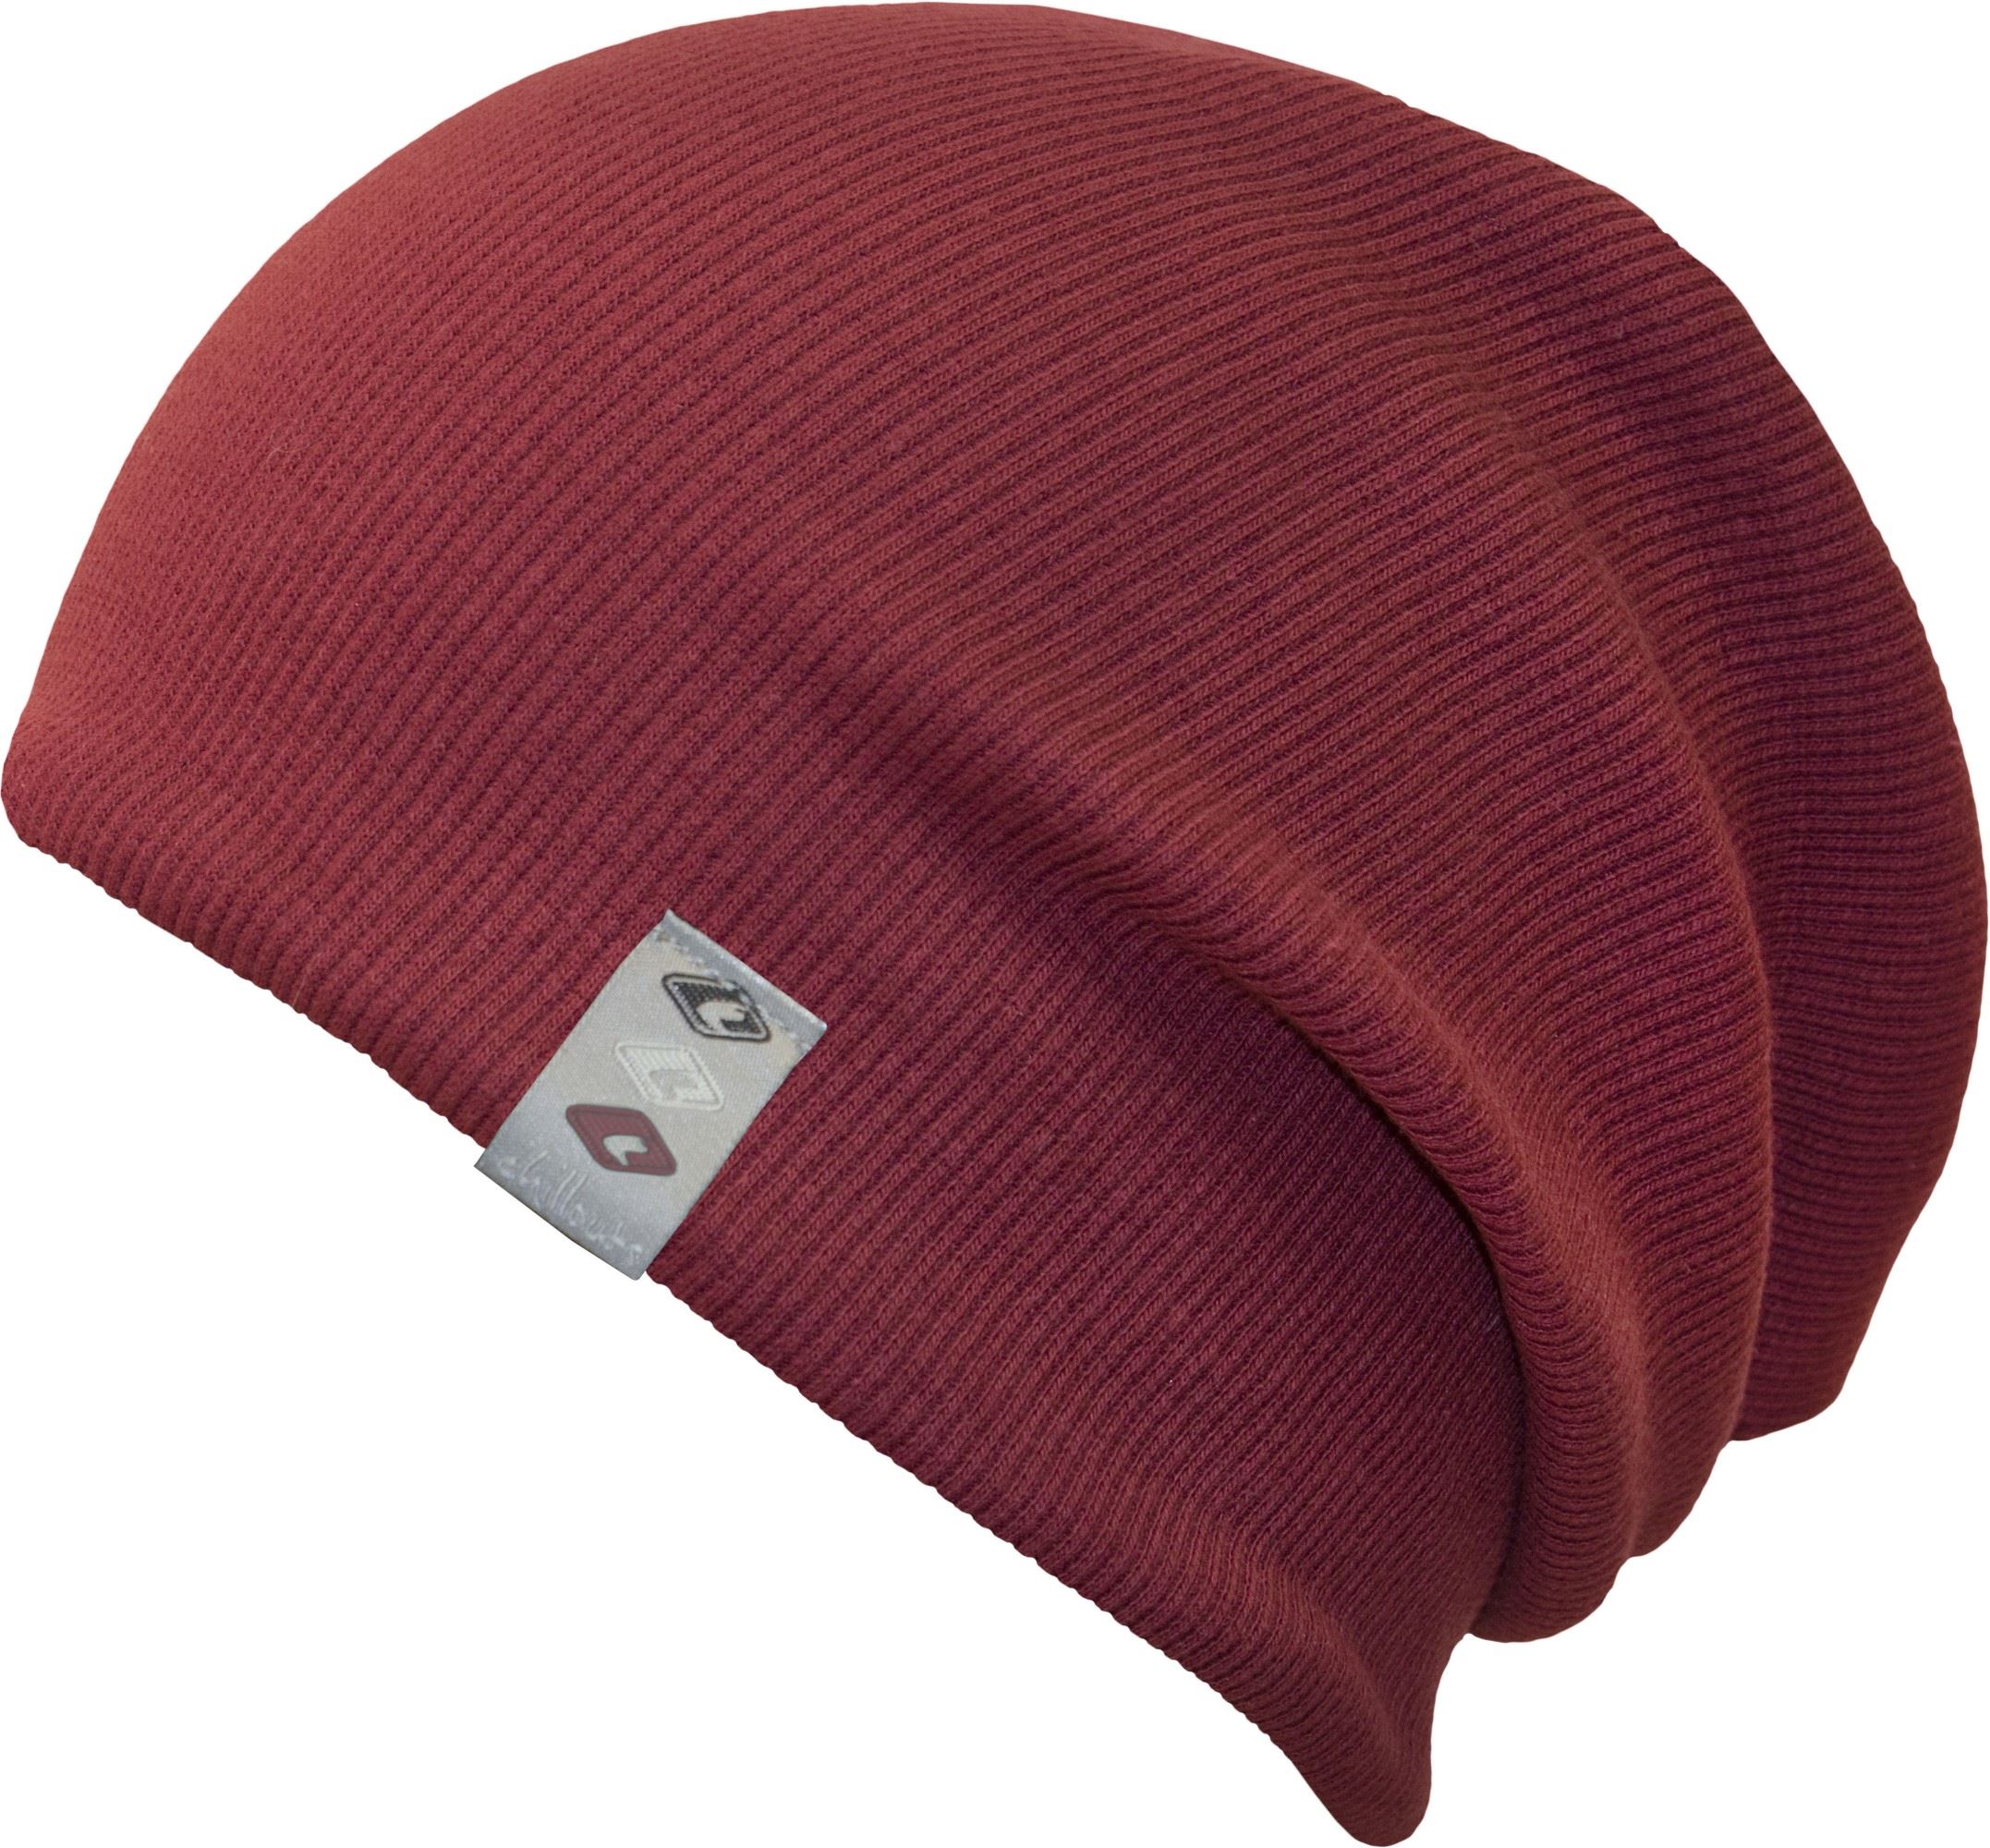 Chillouts Beanie - Brooklyn Hat 05 - Red / Blue